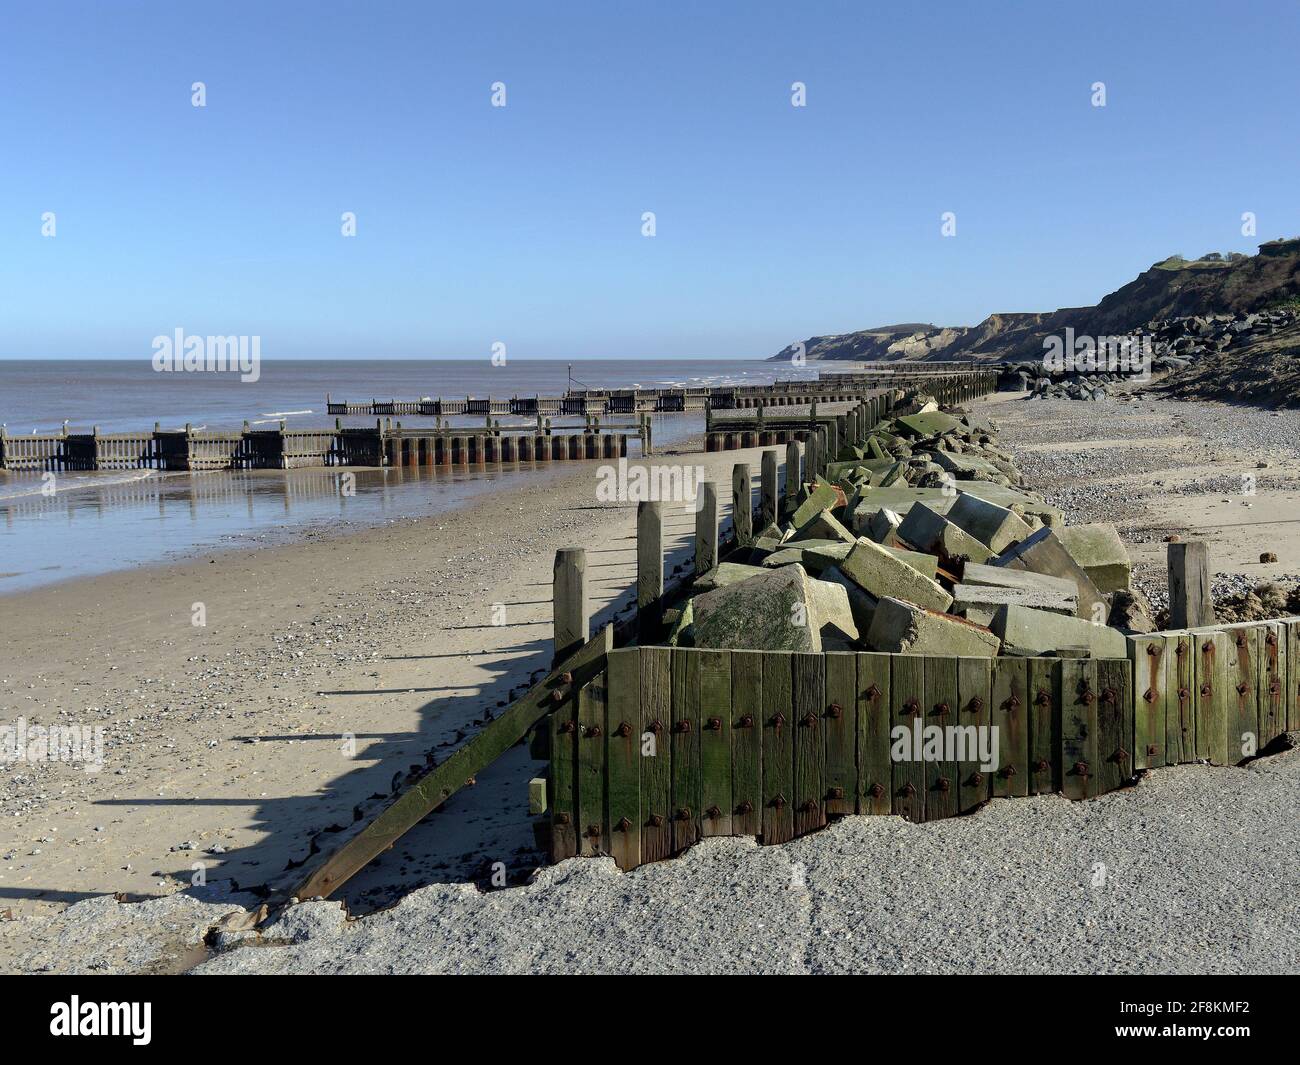 Sea defences protecting the beach and cliffs at the popular residential and holiday village of Overstrand on the North Norfolk coast. Stock Photo